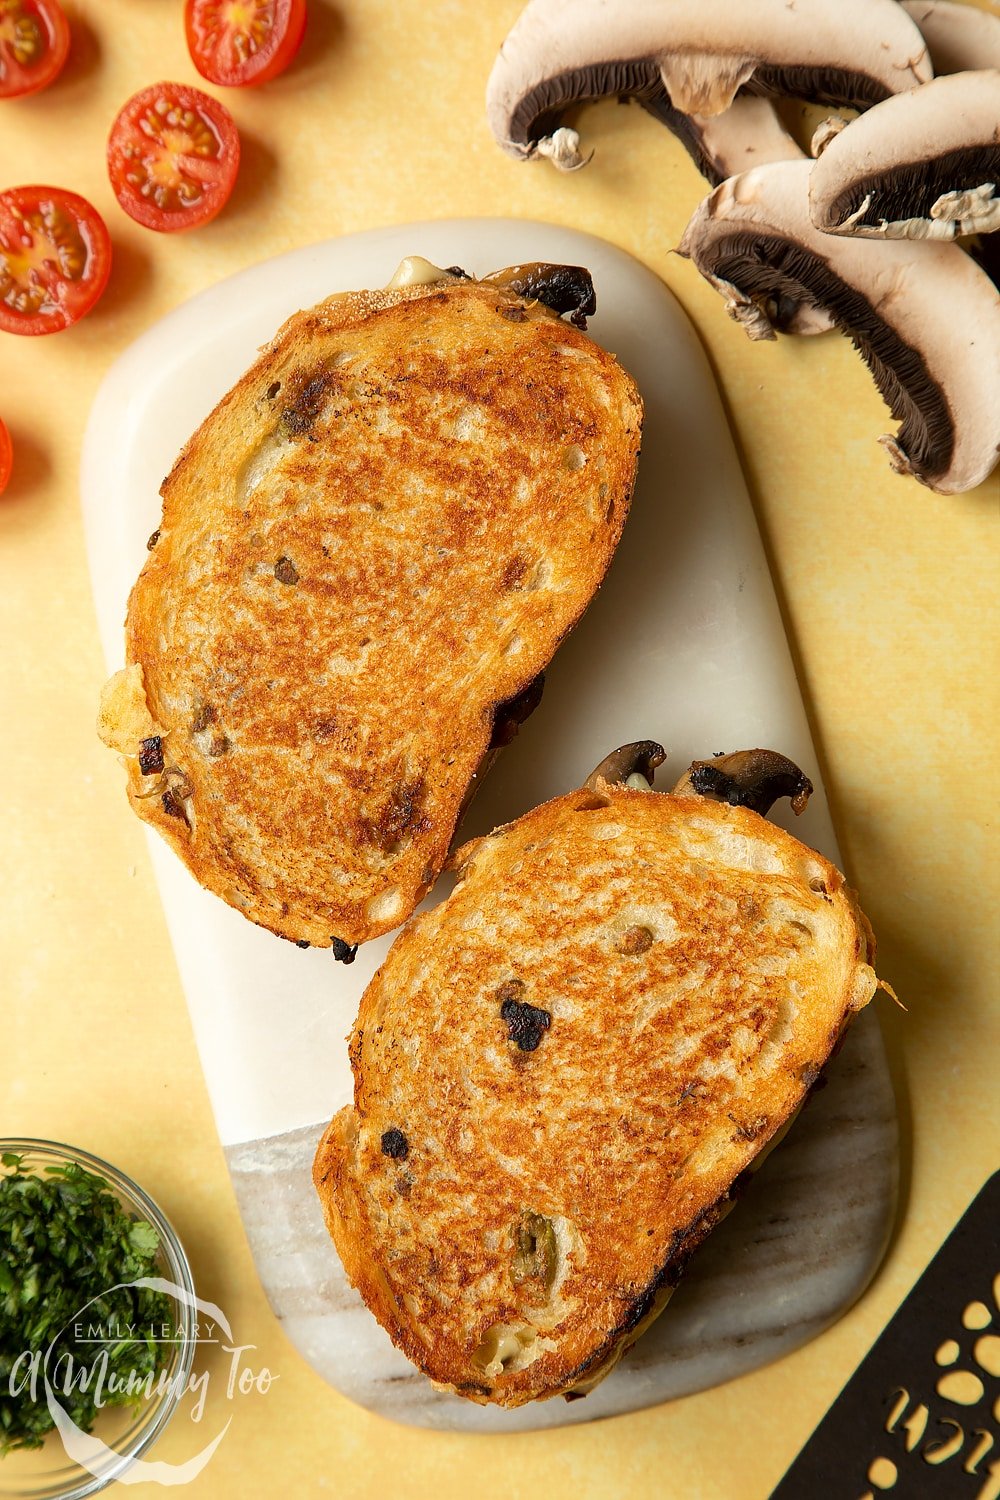 Two Jarlsberg cheese and mushroom toasties are on a serving board waiting to be cut in half and eaten.